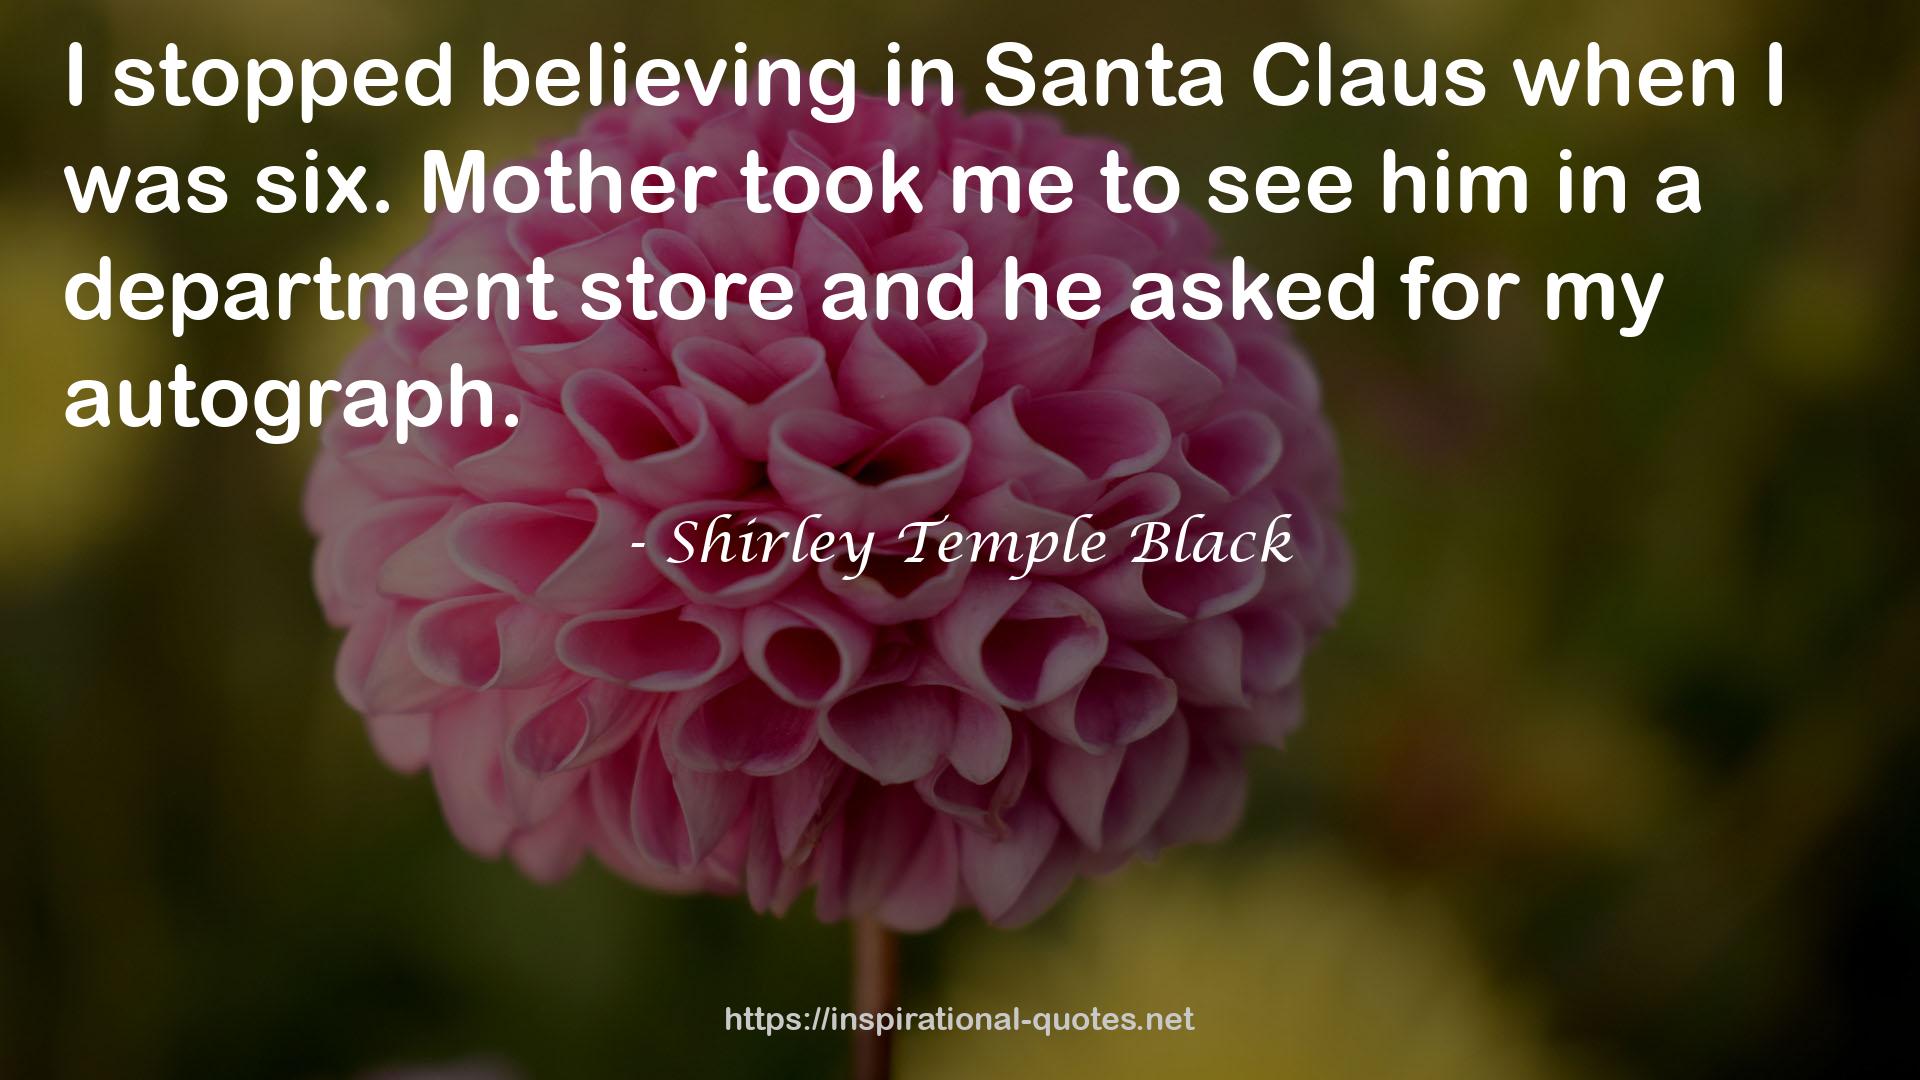 Shirley Temple Black QUOTES